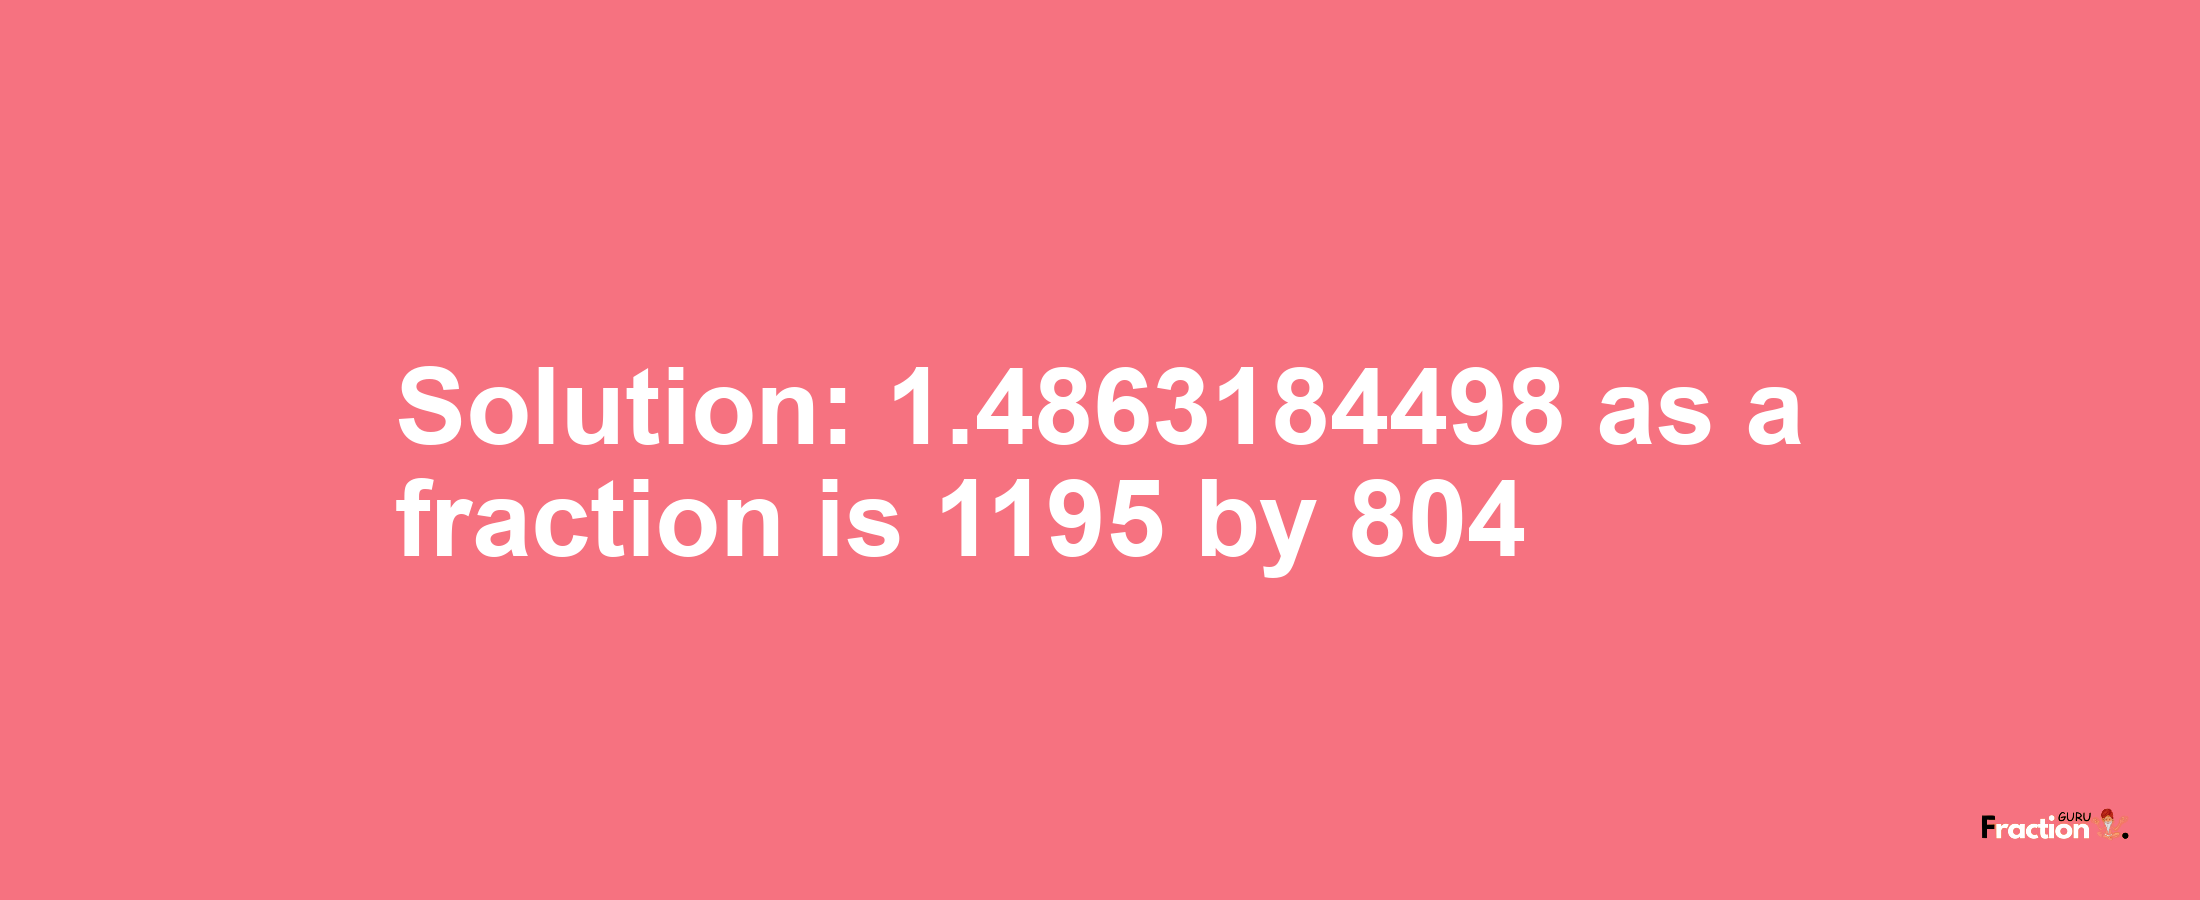 Solution:1.4863184498 as a fraction is 1195/804